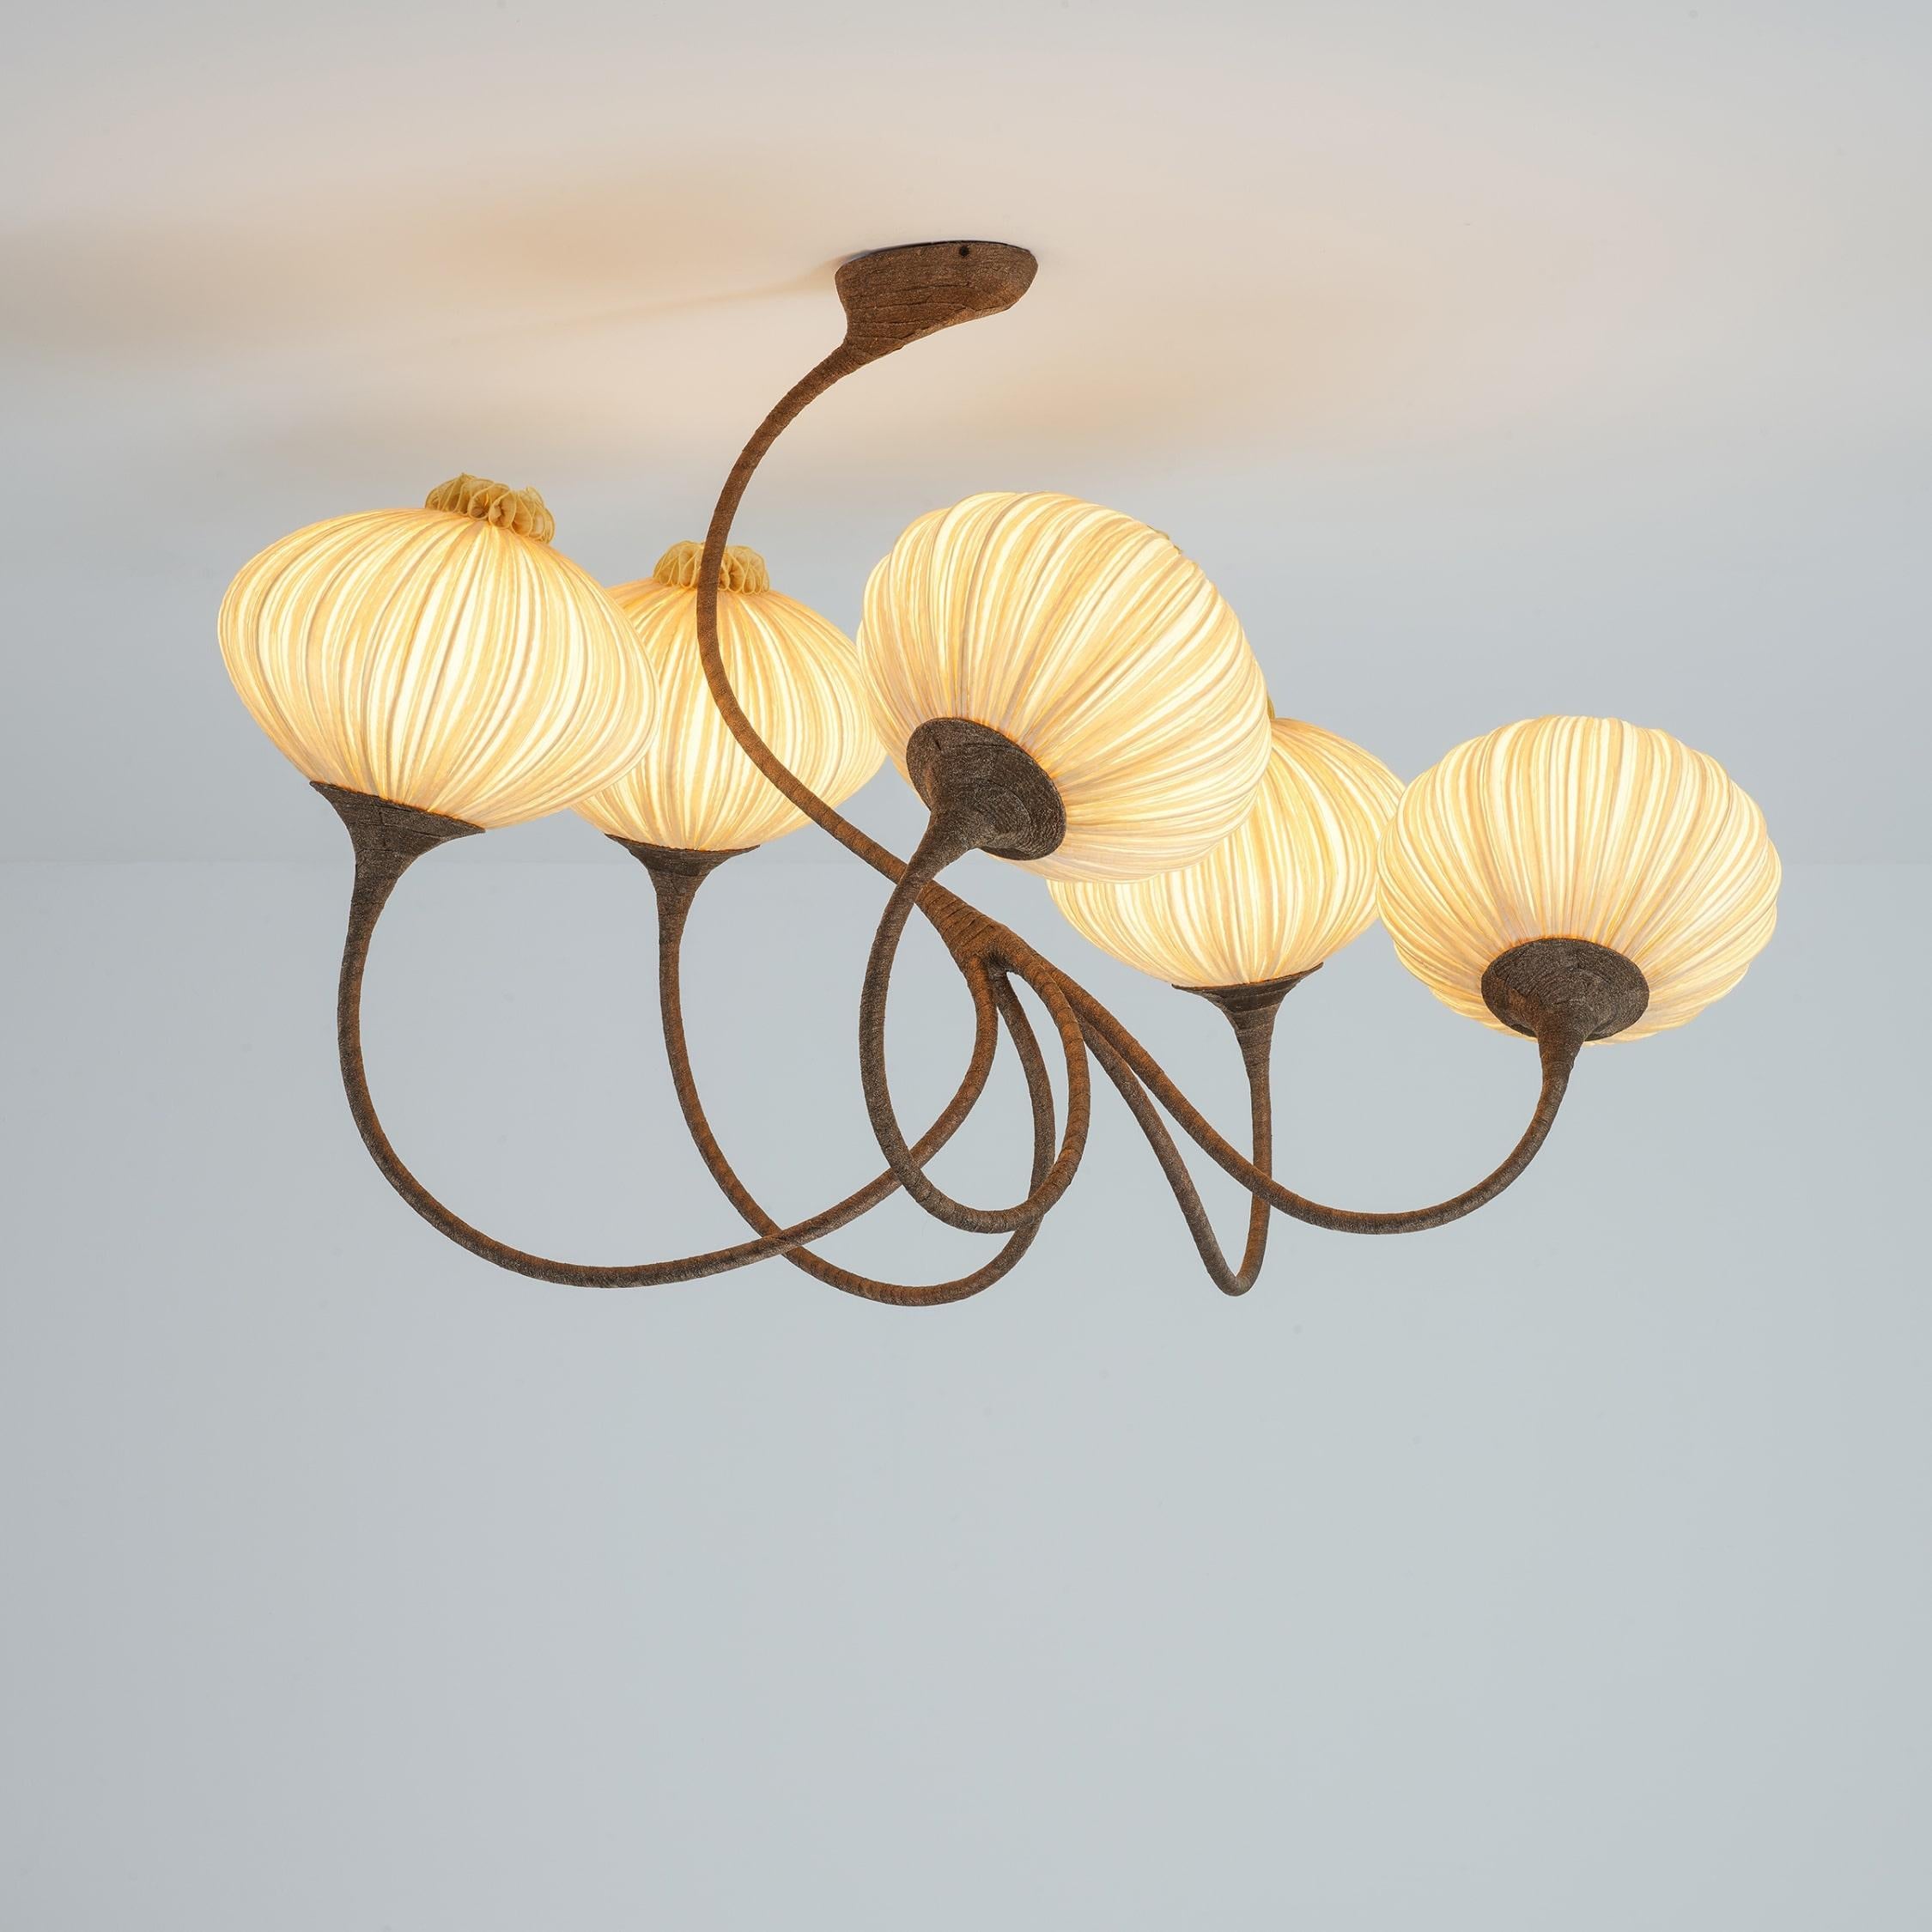 The 5 Palms chandelier is part of the Palm Family which takes its inspiration directly from nature while playing with movement and grace. The ceiling fixture is highly customizable, so it can fit any space. Its highly-stylized curvilinear branches